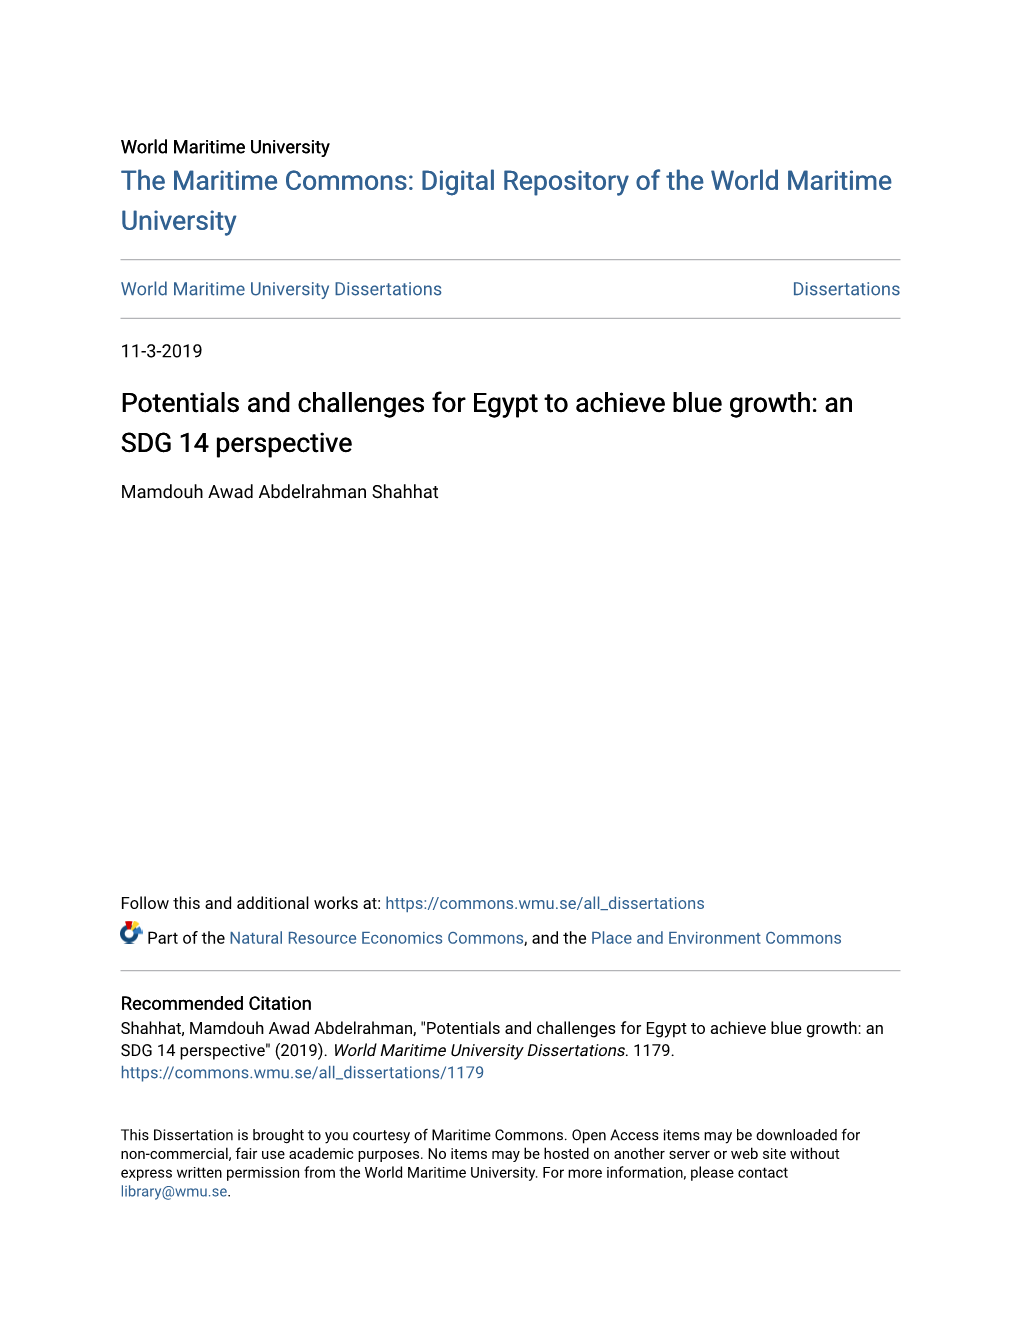 Potentials and Challenges for Egypt to Achieve Blue Growth: an SDG 14 Perspective